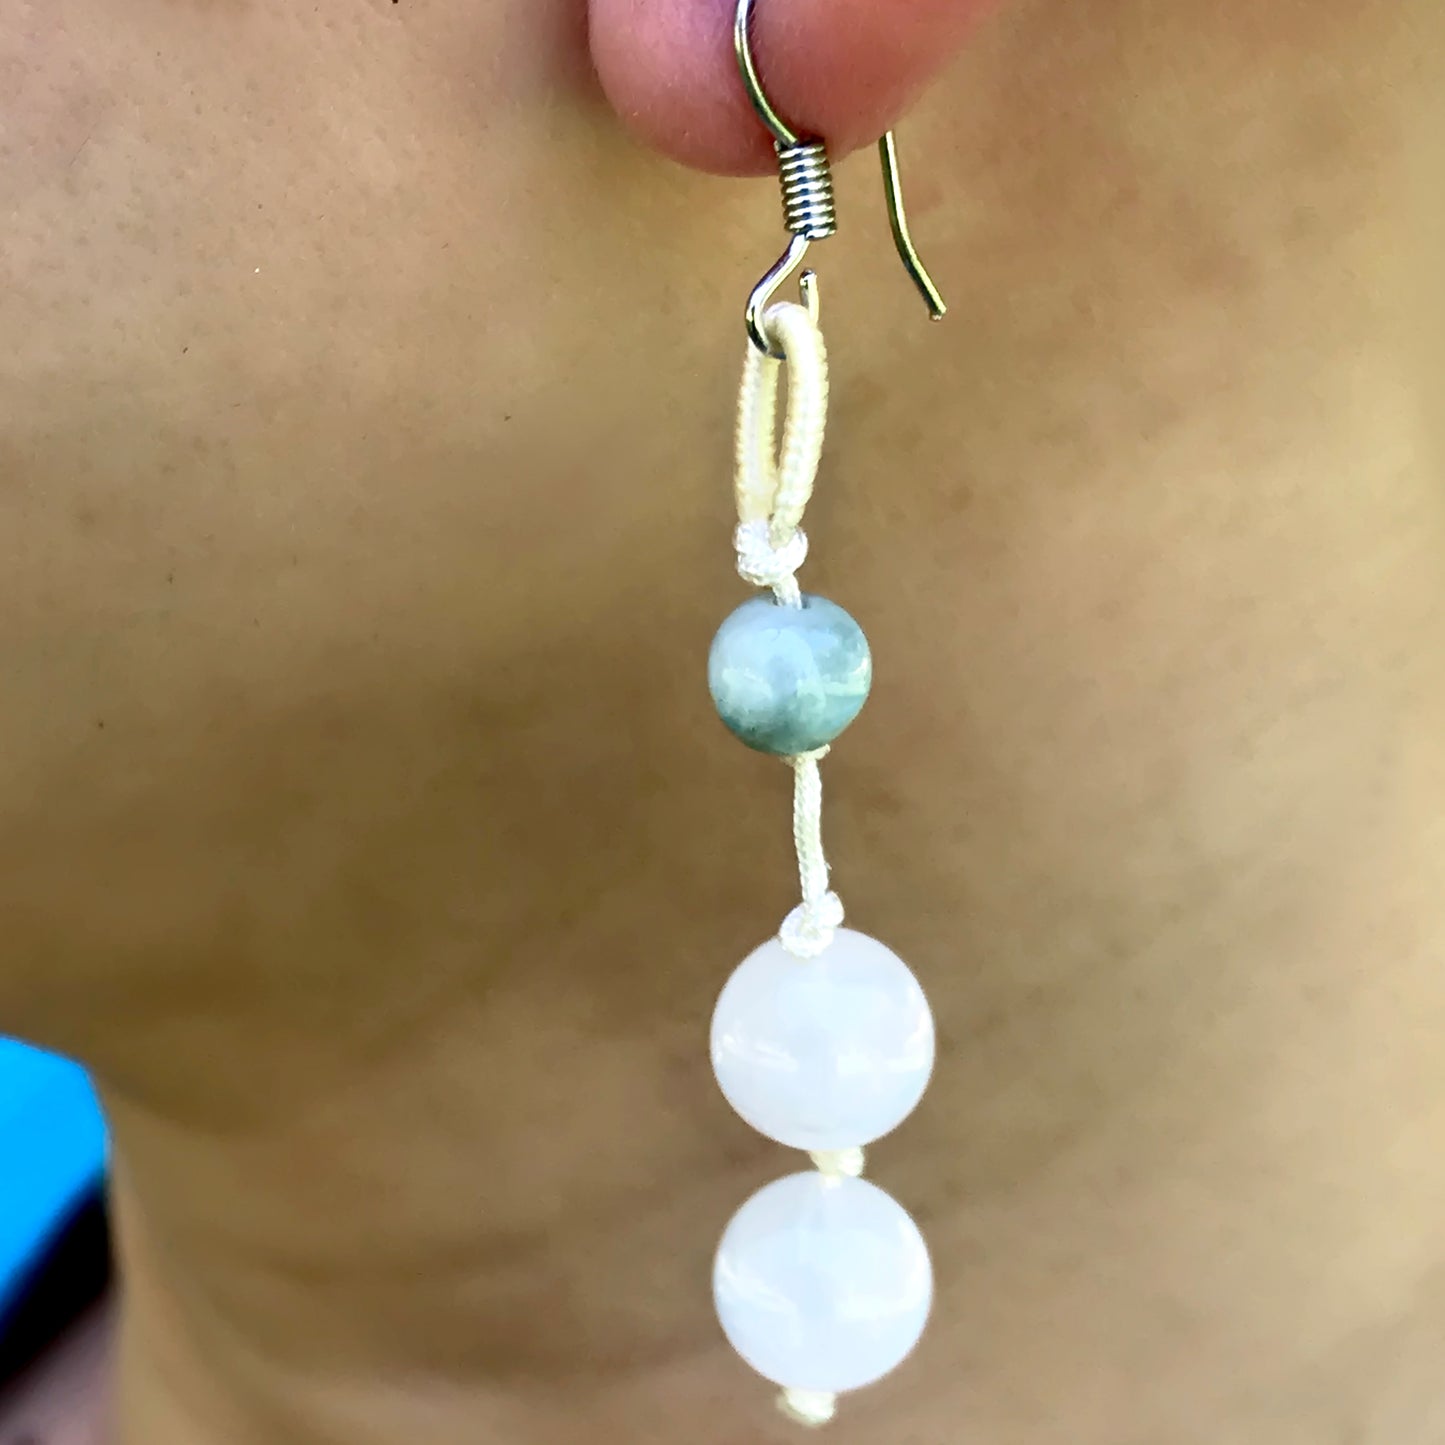 Make a Statement with Alluring Beads Gemstone Earrings made with White Cord